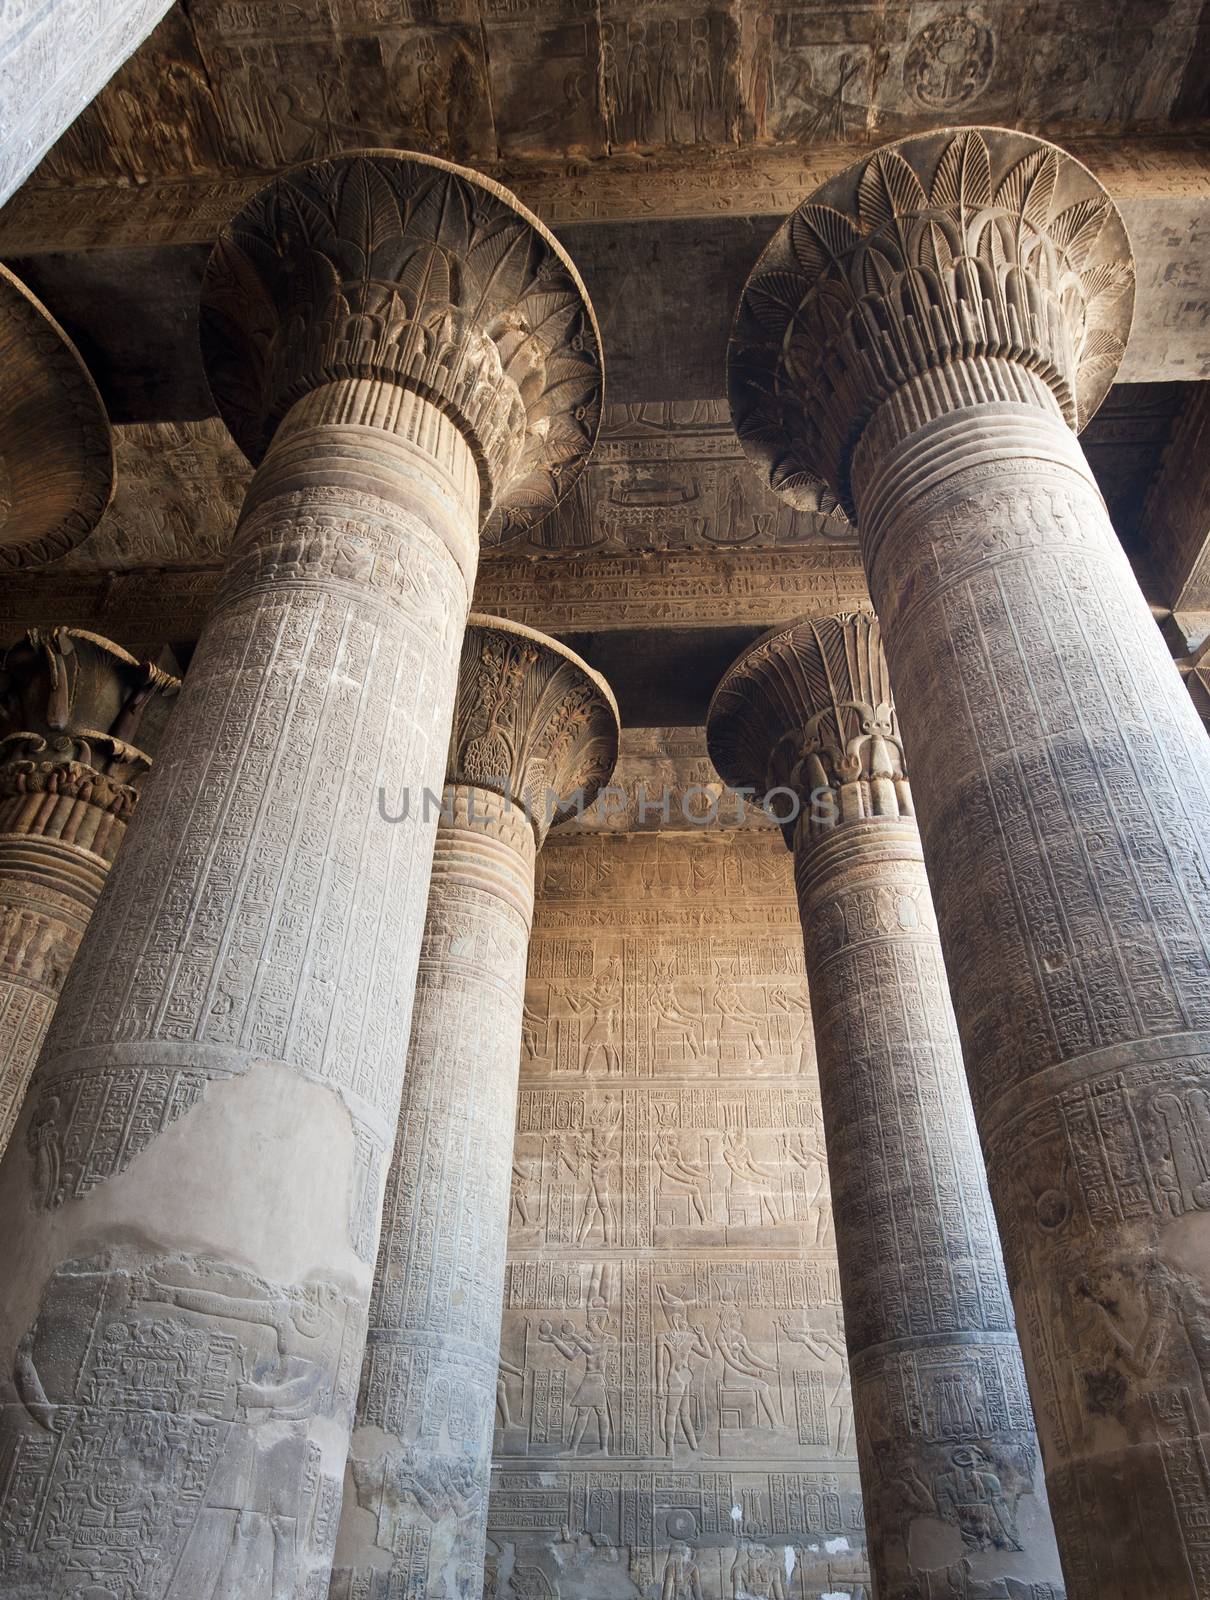 Columns in an ancient egyptian temple by paulvinten